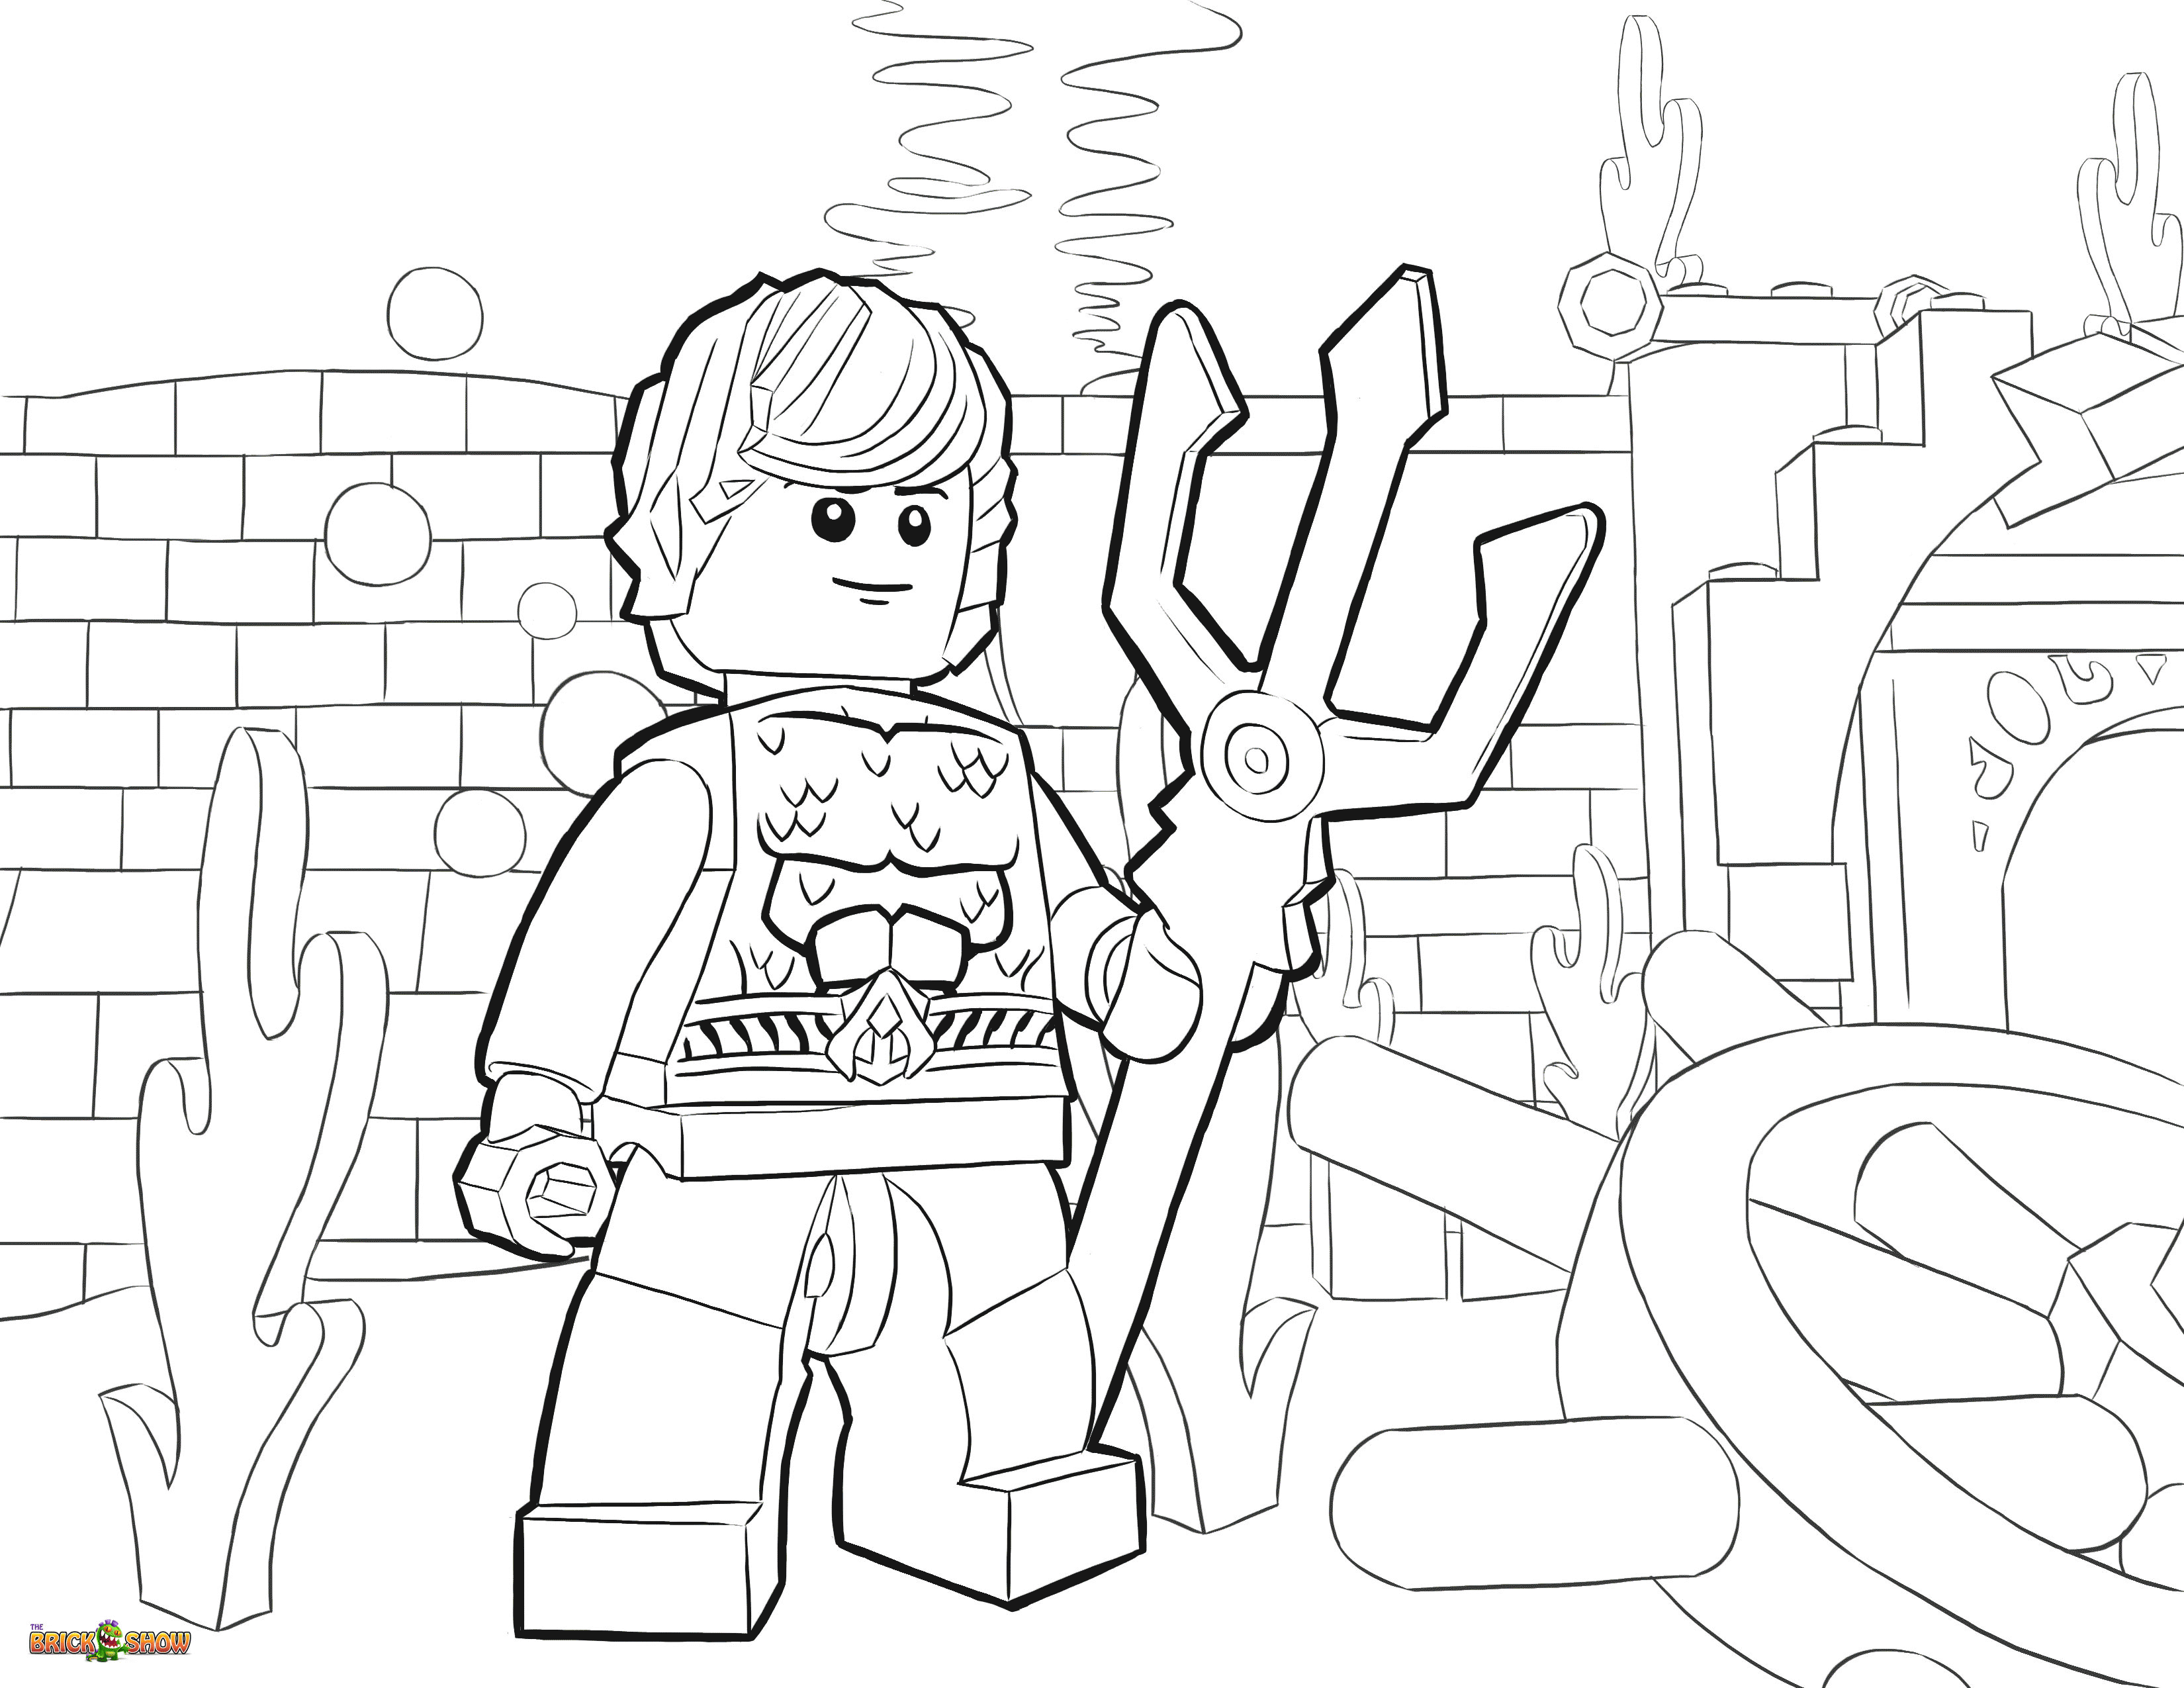 Free Coloring Pages Lego Avengers, Download Free Coloring Pages Lego